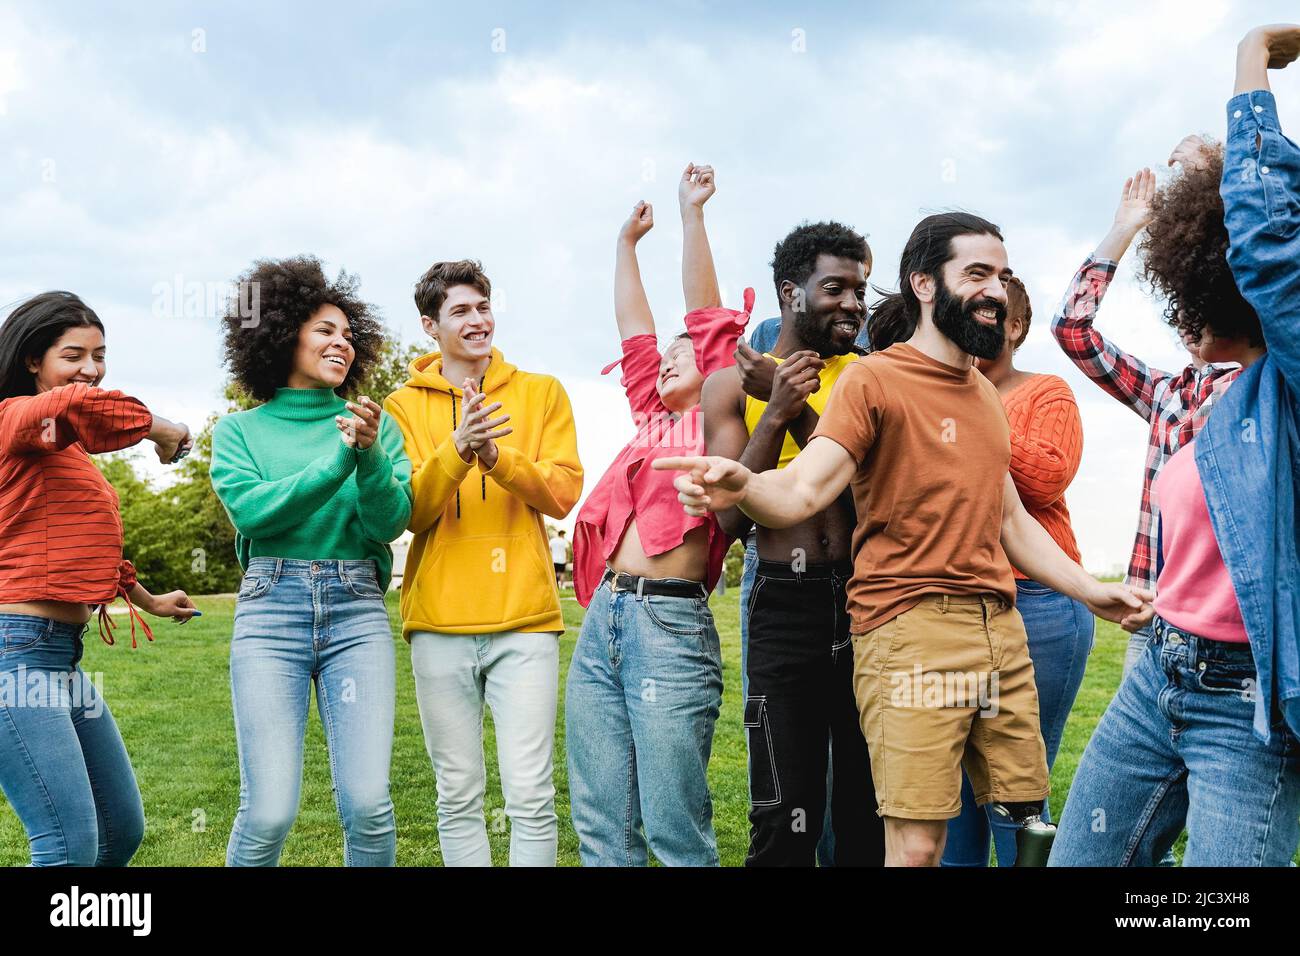 Diverse friends having fun dancing together outdoor - Diversity and multiethnic community concept - Focus on man with prosthetic leg Stock Photo